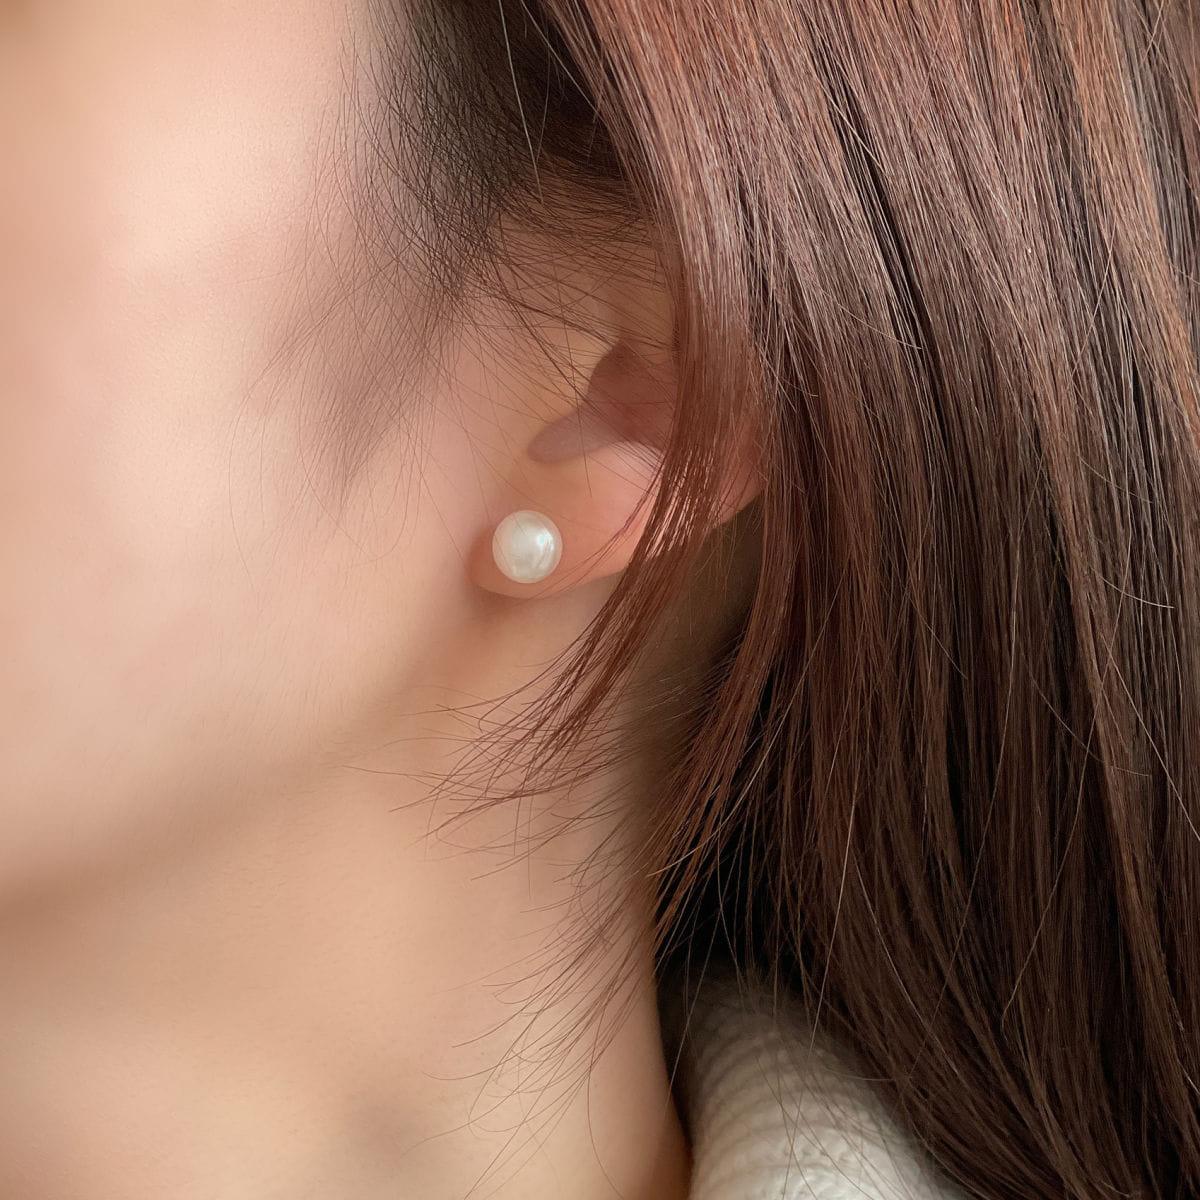 925 Silver]淡水パールピアス (6 Size) 真珠 両耳用 3mm 4mm 6mm 8mm 